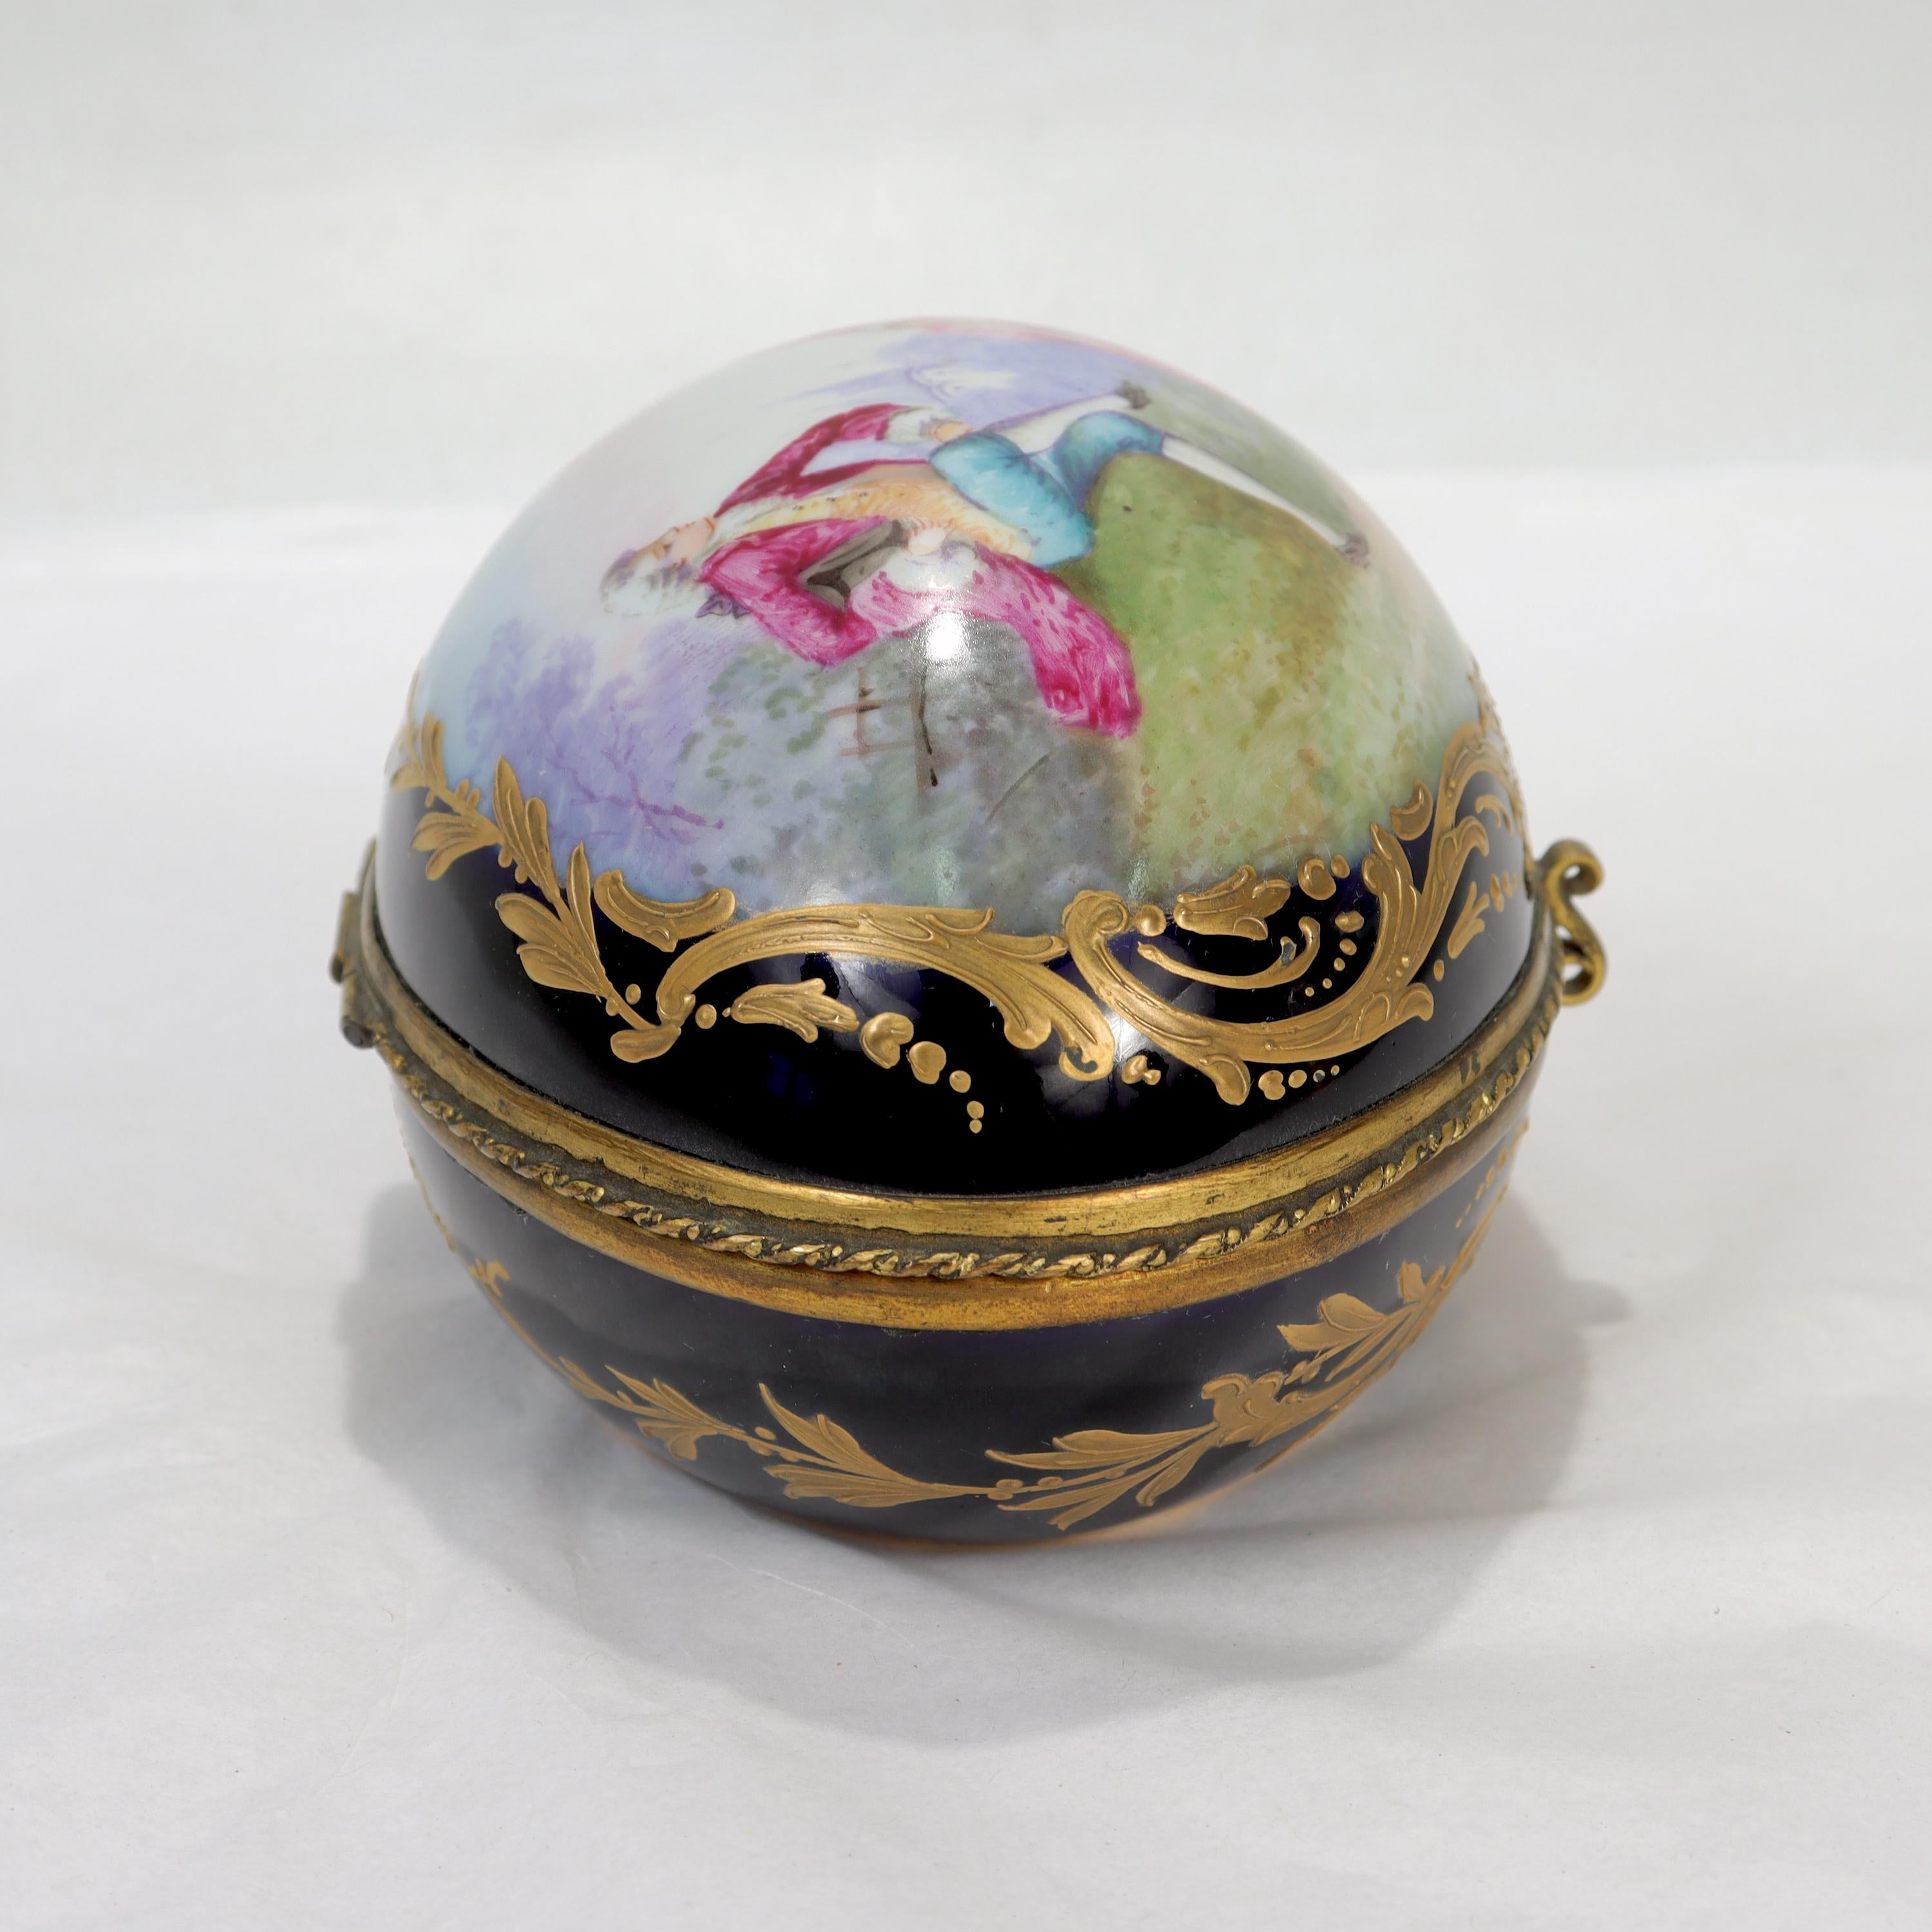 Antique Chateau Des Tuileries Sevres Type Porcelain Hand Painted Dresser Box In Good Condition For Sale In Philadelphia, PA